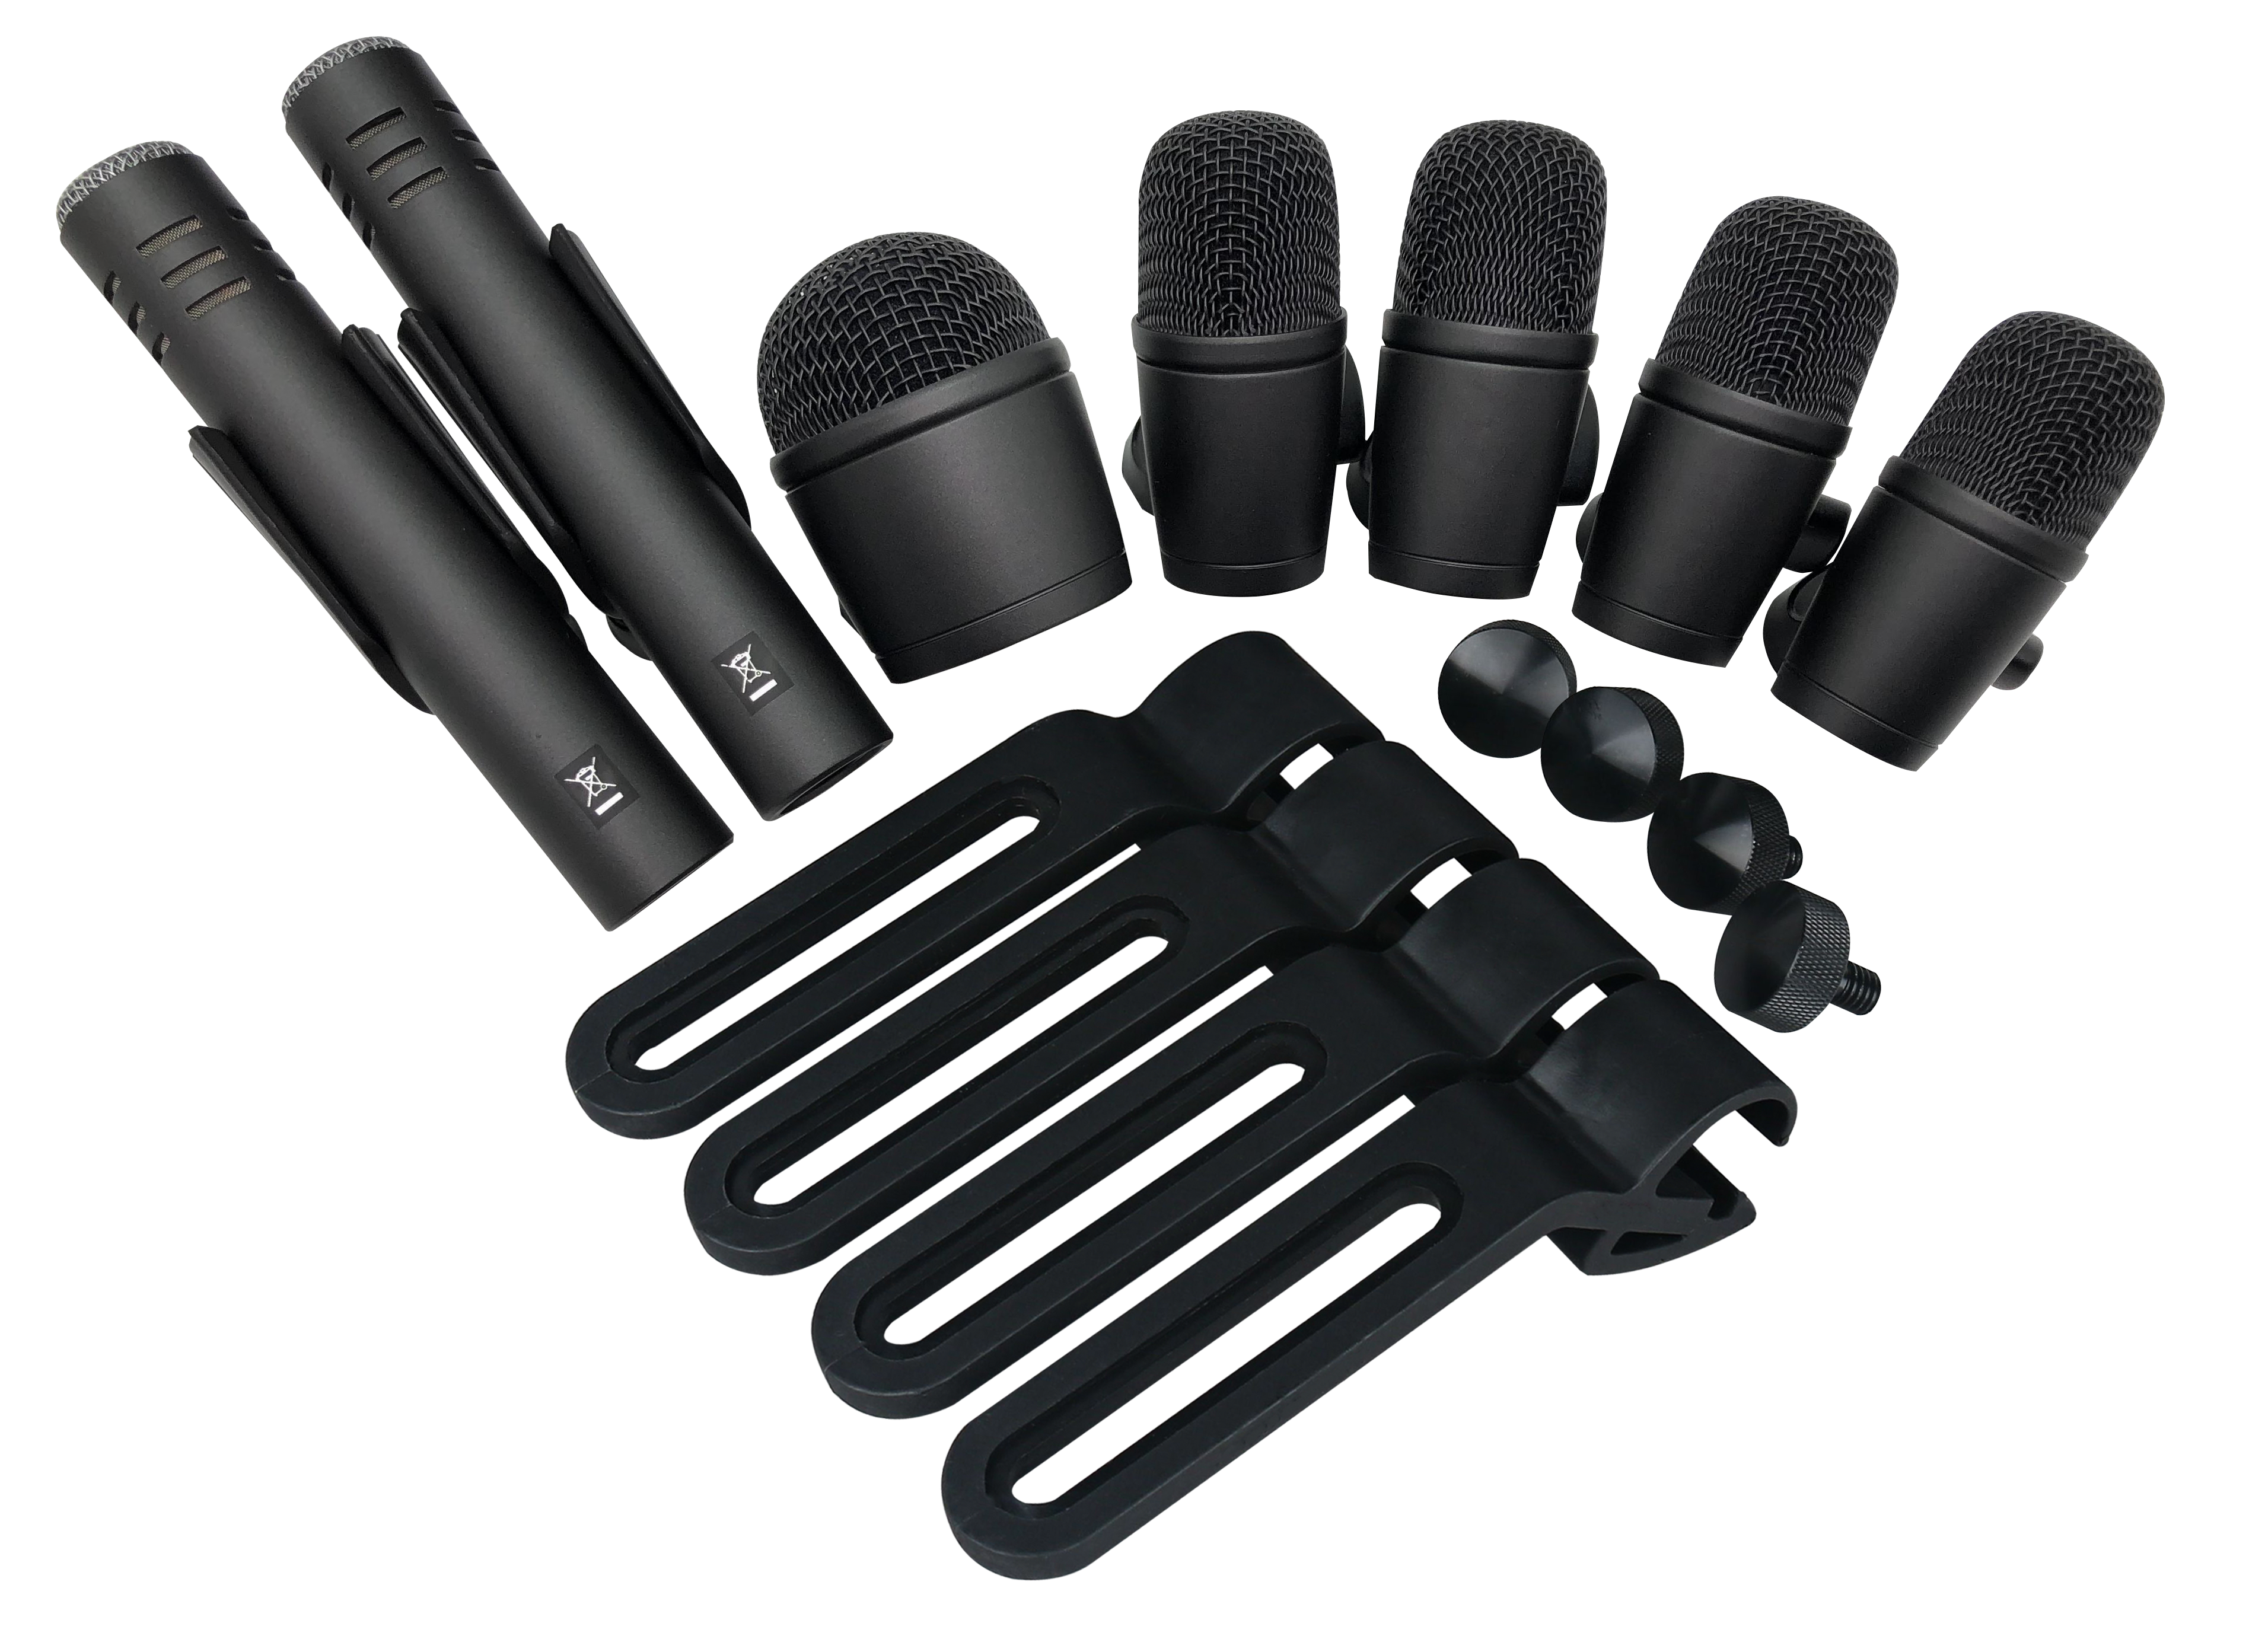 China SKY DR07 wireless microphone drum kit microphone set wholesale